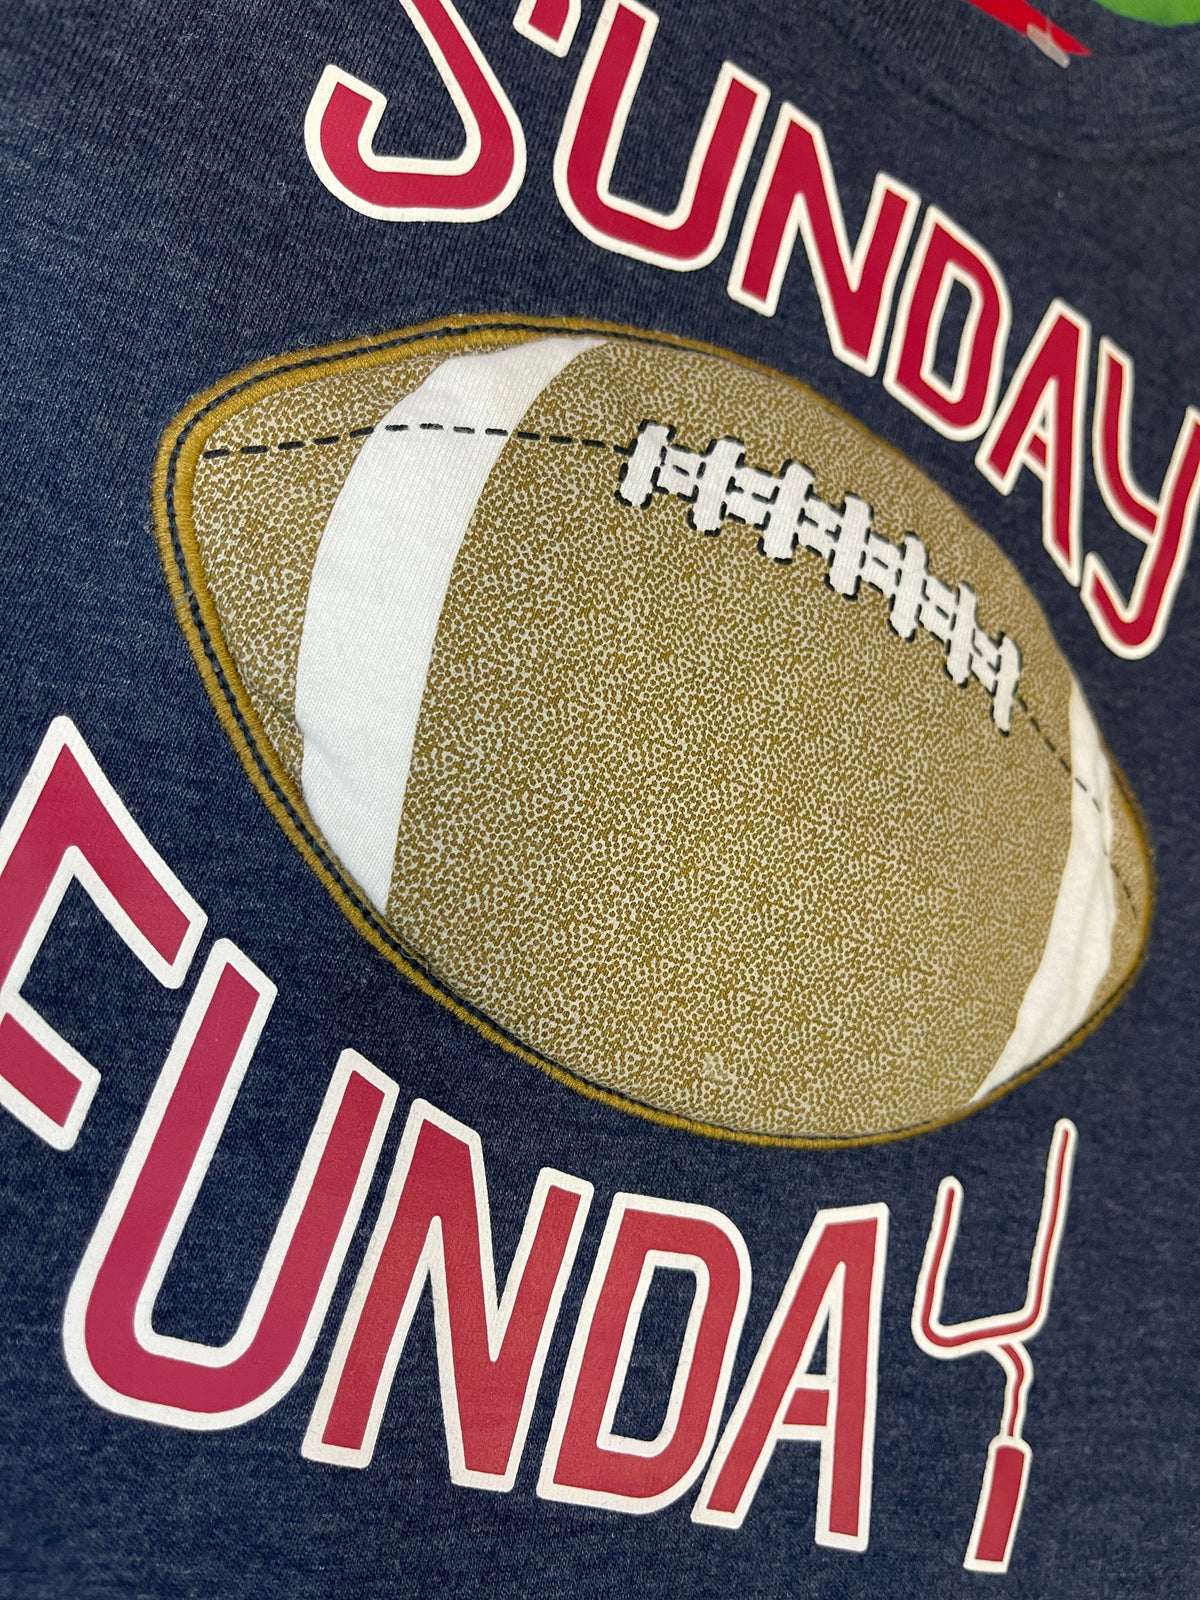 American Football "Sunday Funday" 3D T-Shirt Youth X-Small 4T